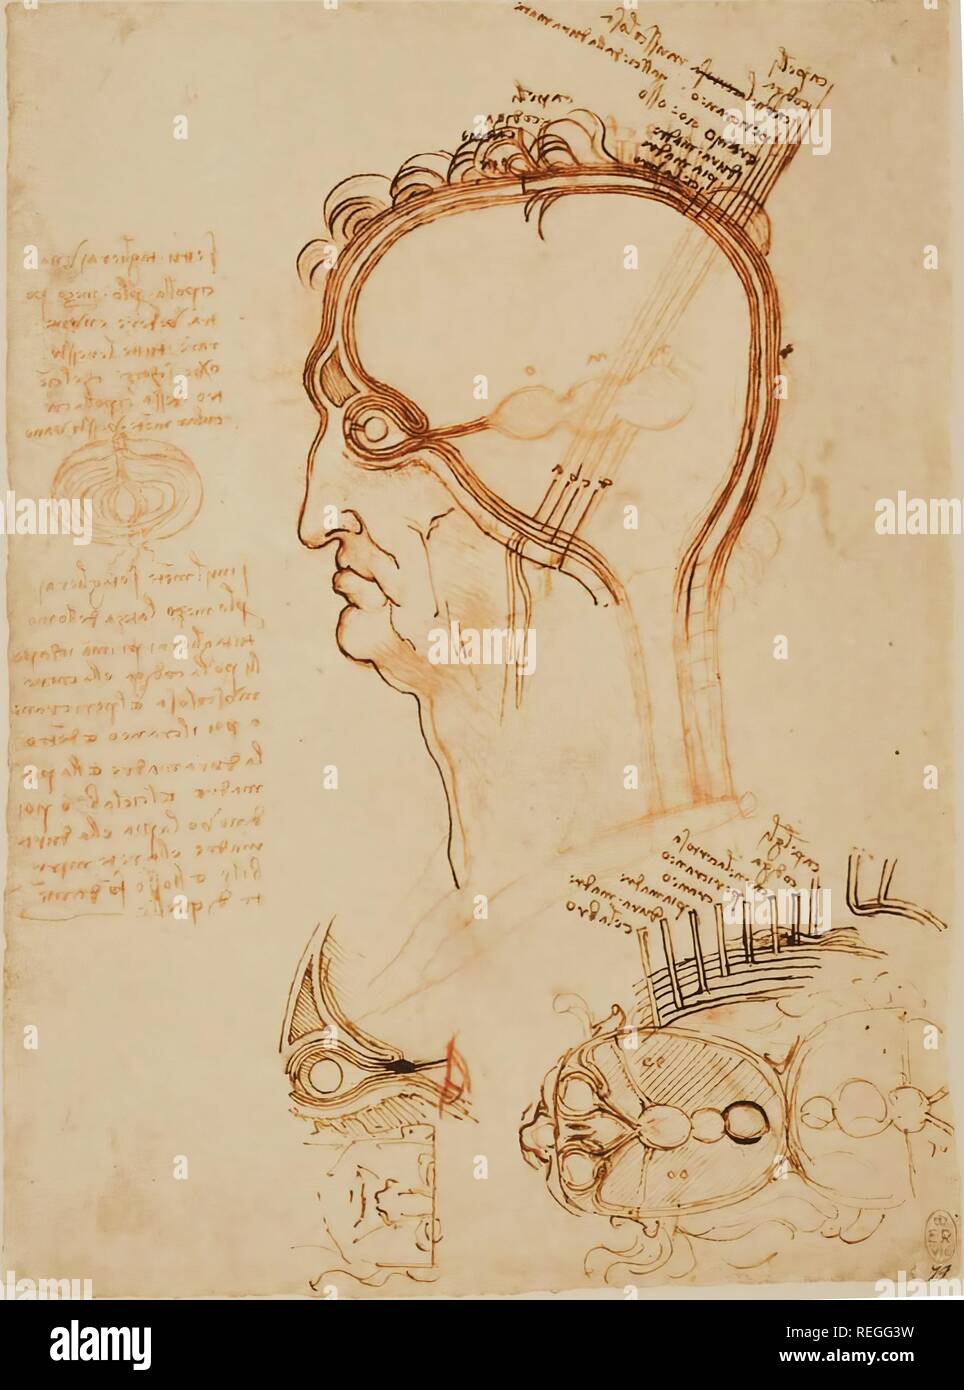 eonardo da Vinci, Sagittal and Horizontal Sections of the Human Head with Layers of the Head compared with an Onion. K/P 32r (ca. 1490). On this page Leonardo outlined in a sagittal and transverse plane the 'cell doctrine' concept. The brain cavity is depicted as an empty space with three balloon-like expansions connected to the eye by dura-like coverings connecting with the posterior component of the eye. Using the onion analogy Leonardo comments on the layers of the scalp, eye and brain coverings. The eye is shown in sagittal section with the traditional spherical lens and the frontal sinus  Stock Photo